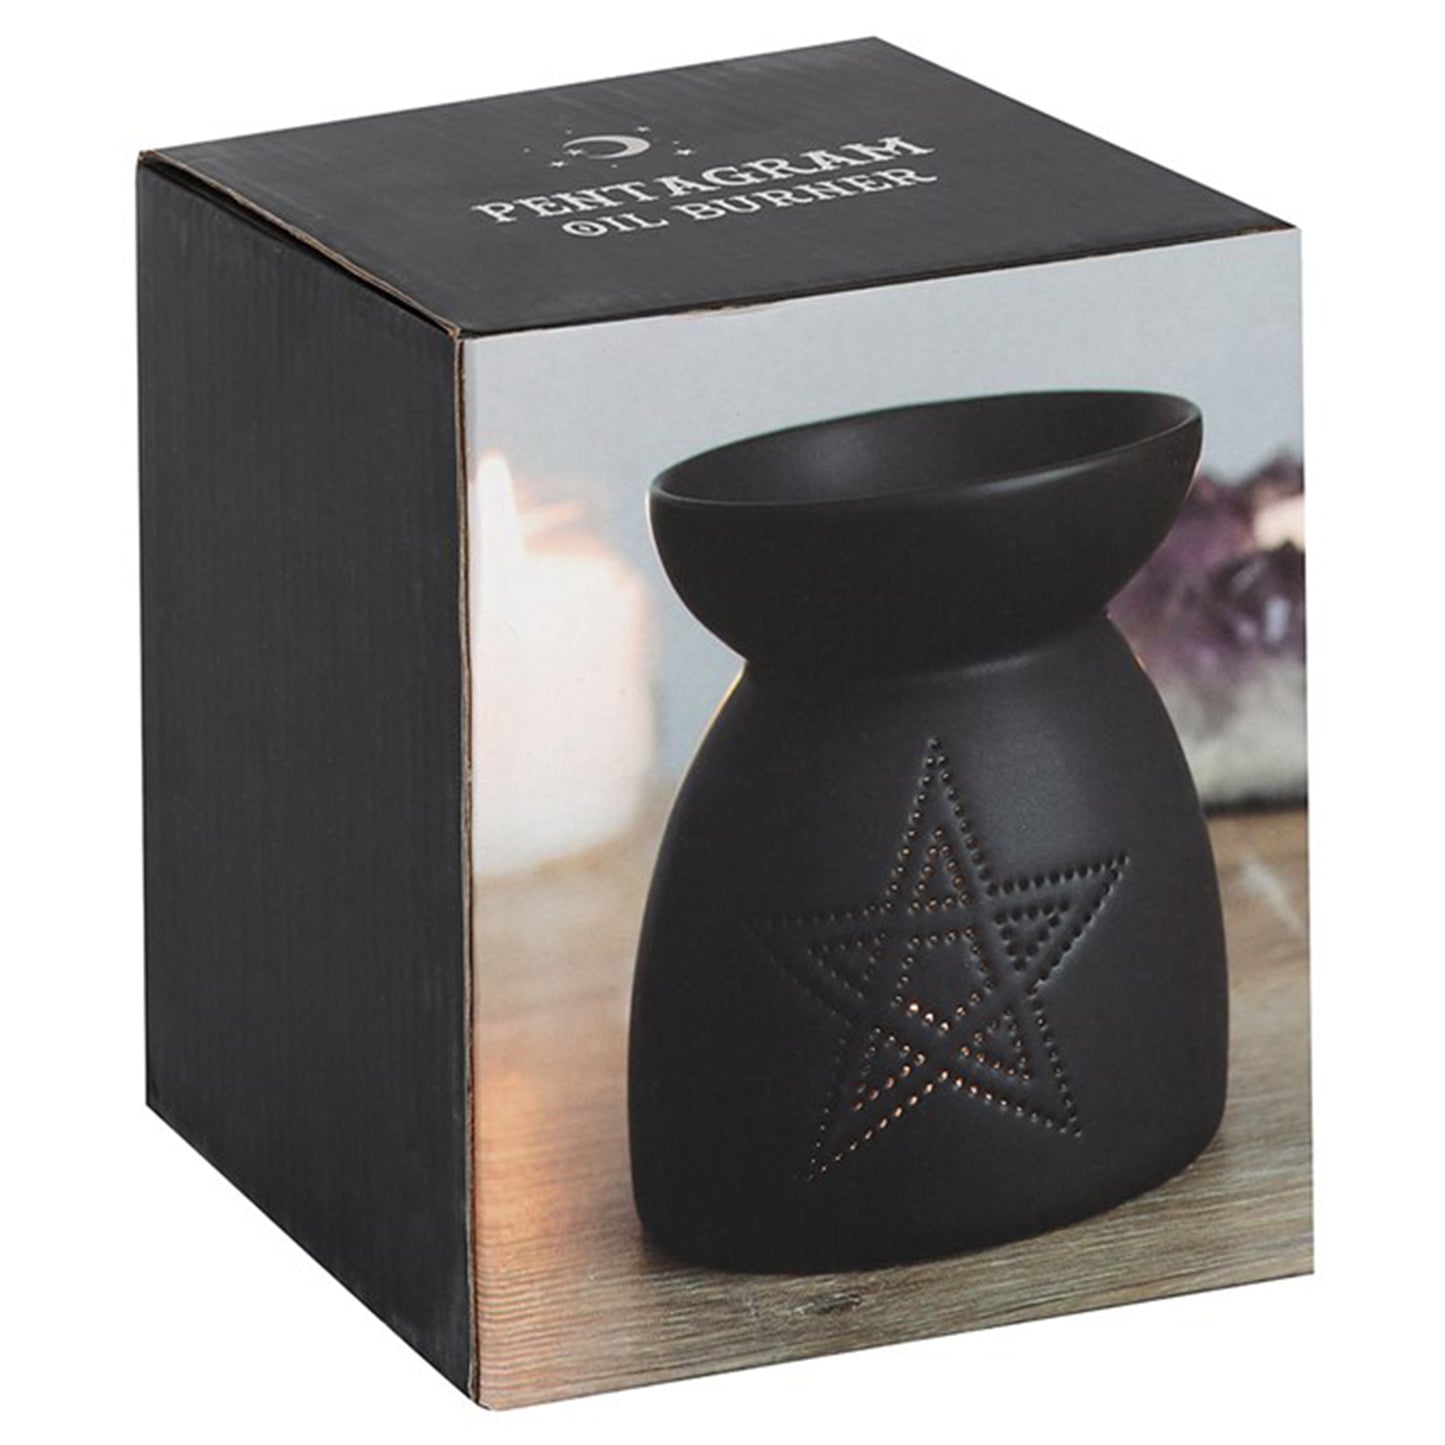 Black Pentagram Cut Out Oil Burner and Wax Melt Warmer in its Packaging | Happy Piranha